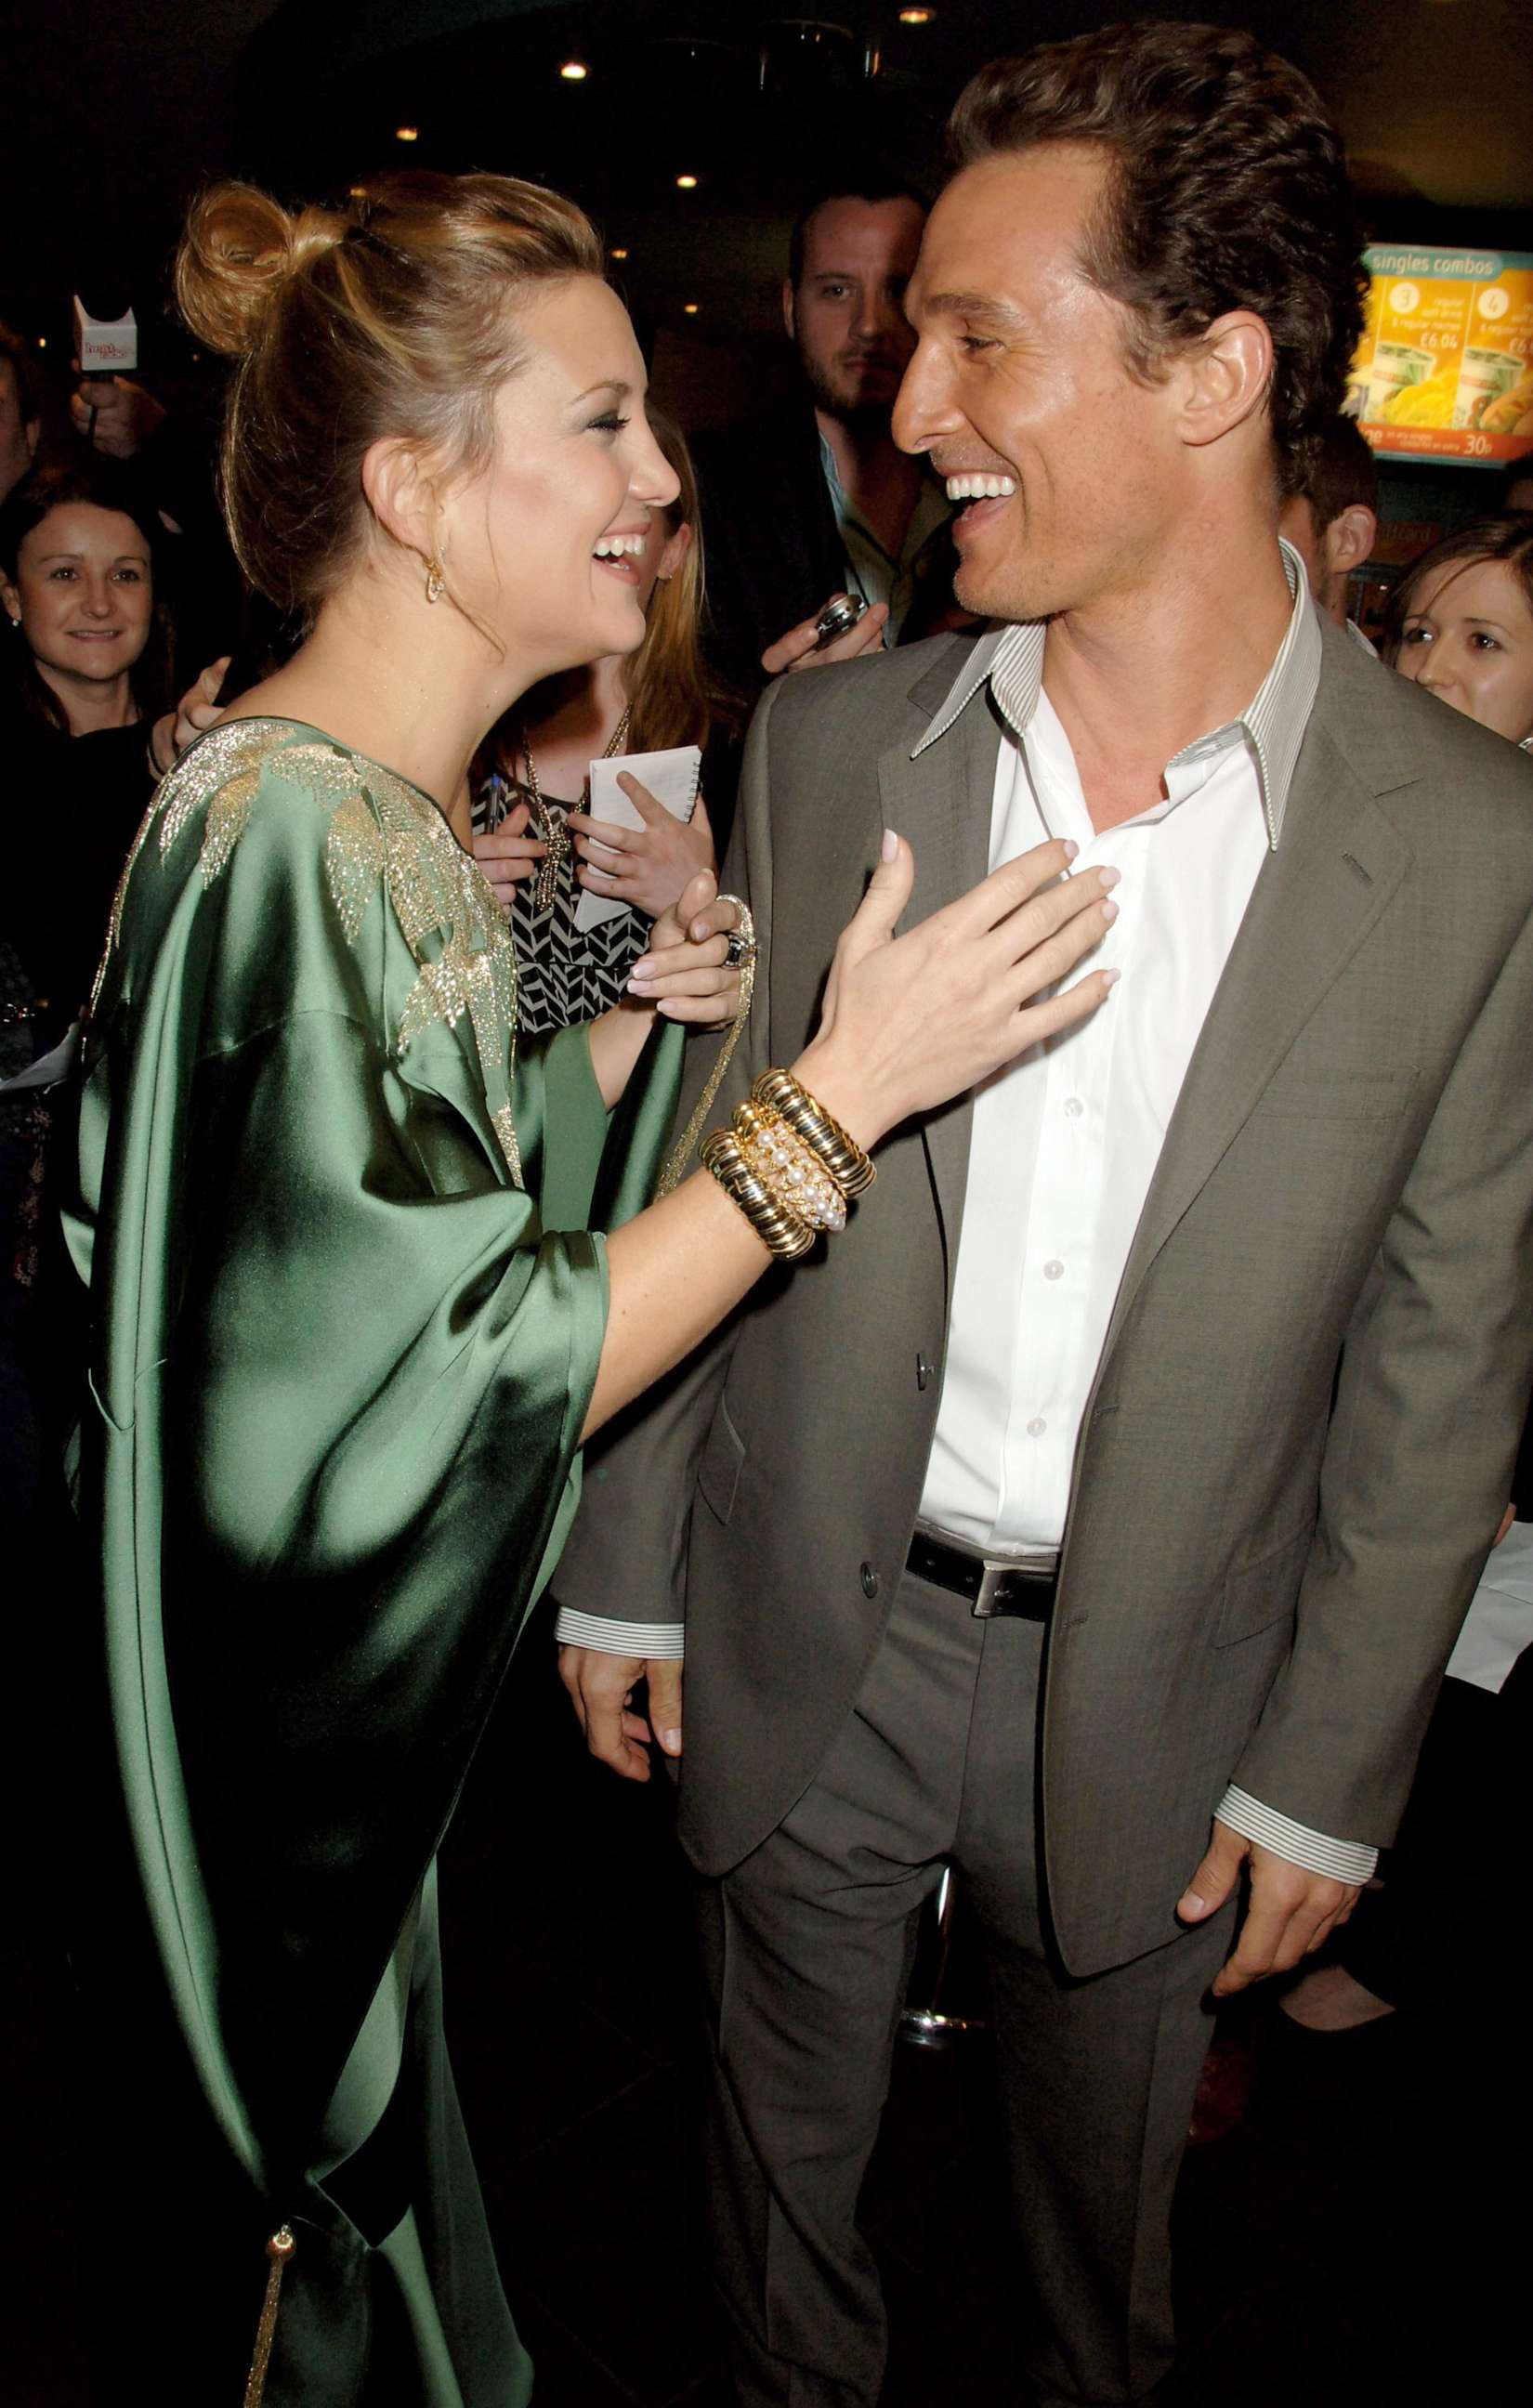 PHOTO: Kate Hudson and actor Matthew McConaughey arrive at the UK Premiere of "Fool's Gold" on April 10, 2008 in London.